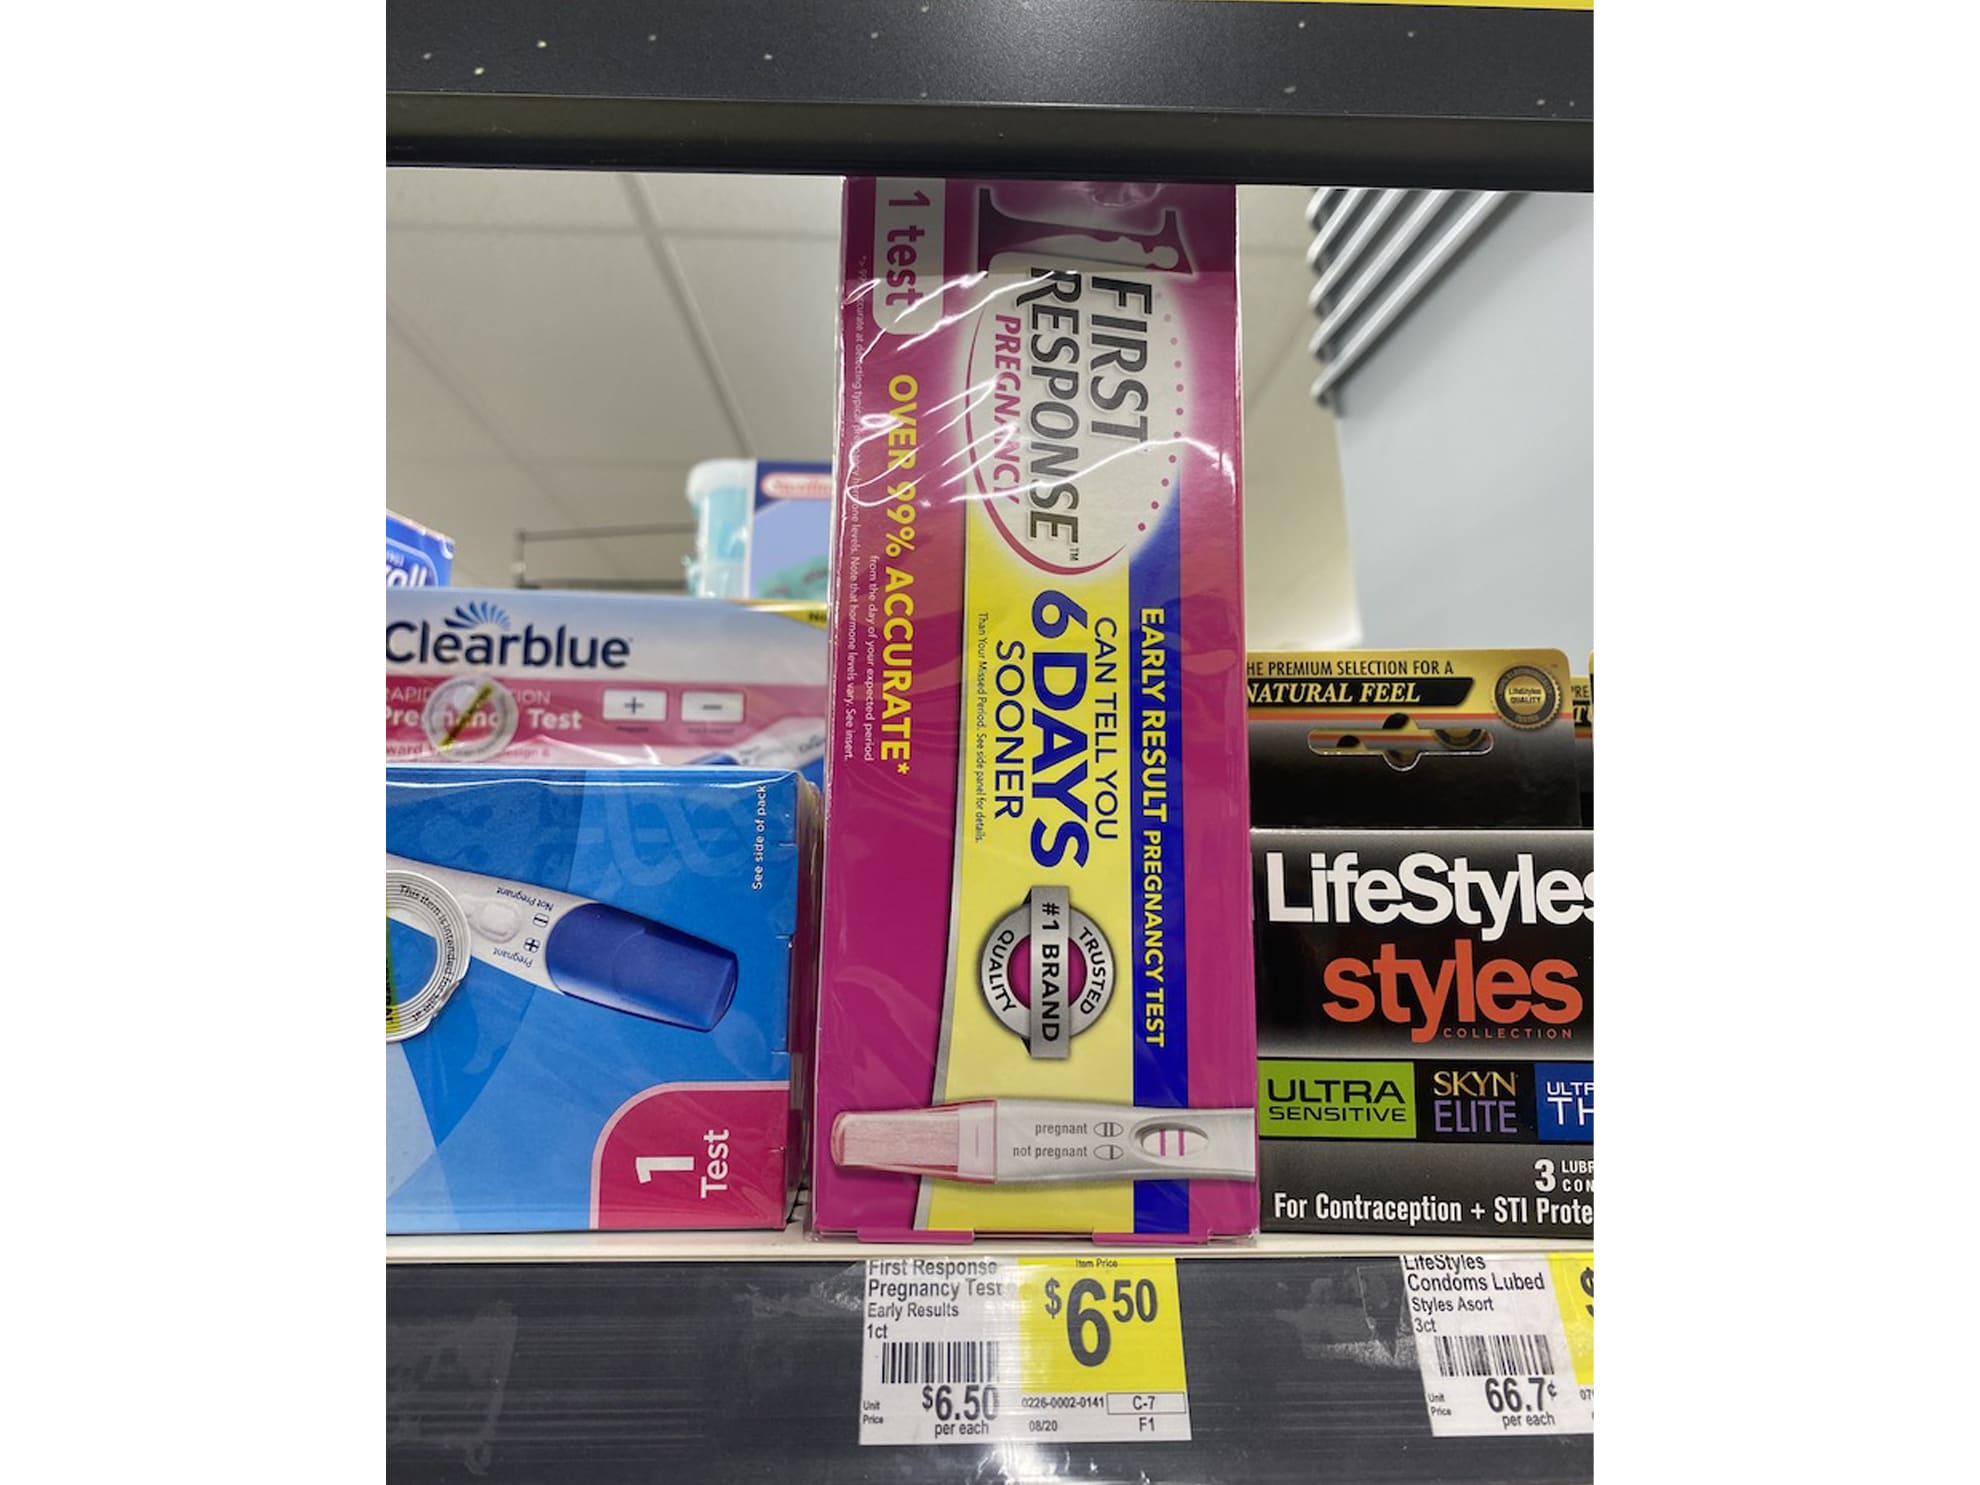 How much does the First Response Pregnancy Test Cost at Dollar General